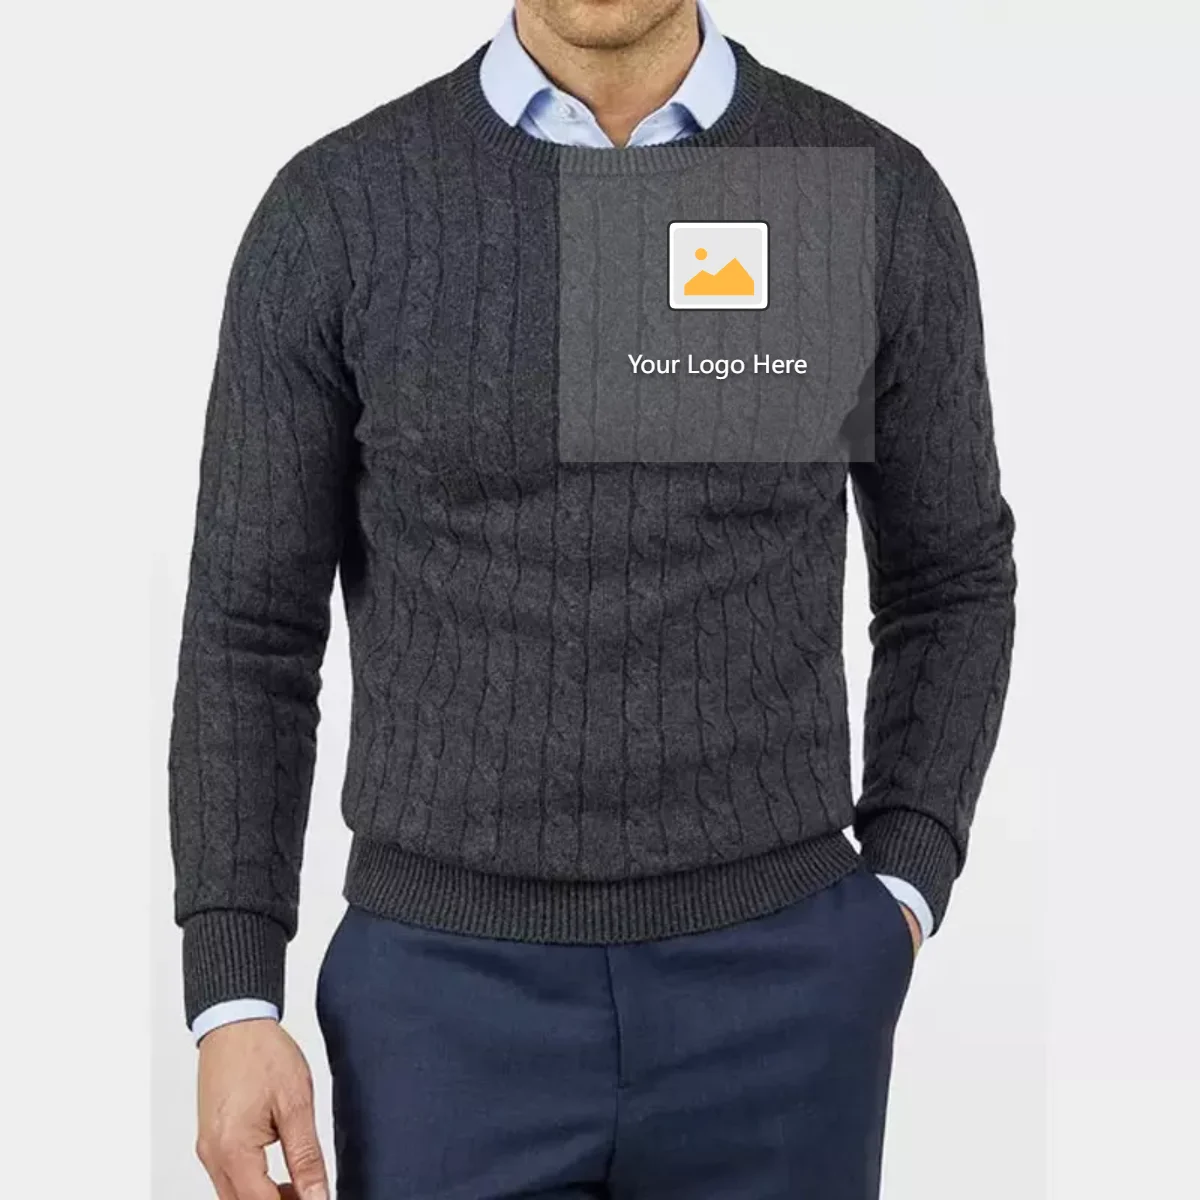 Wholesale Hot Sale 100% Merino Wool Knit Crew Neck Pullover Men Sweater -  Buy Men Sweater,Pullover Sweater,Wool Sweaters For Men Product on  Alibaba.com